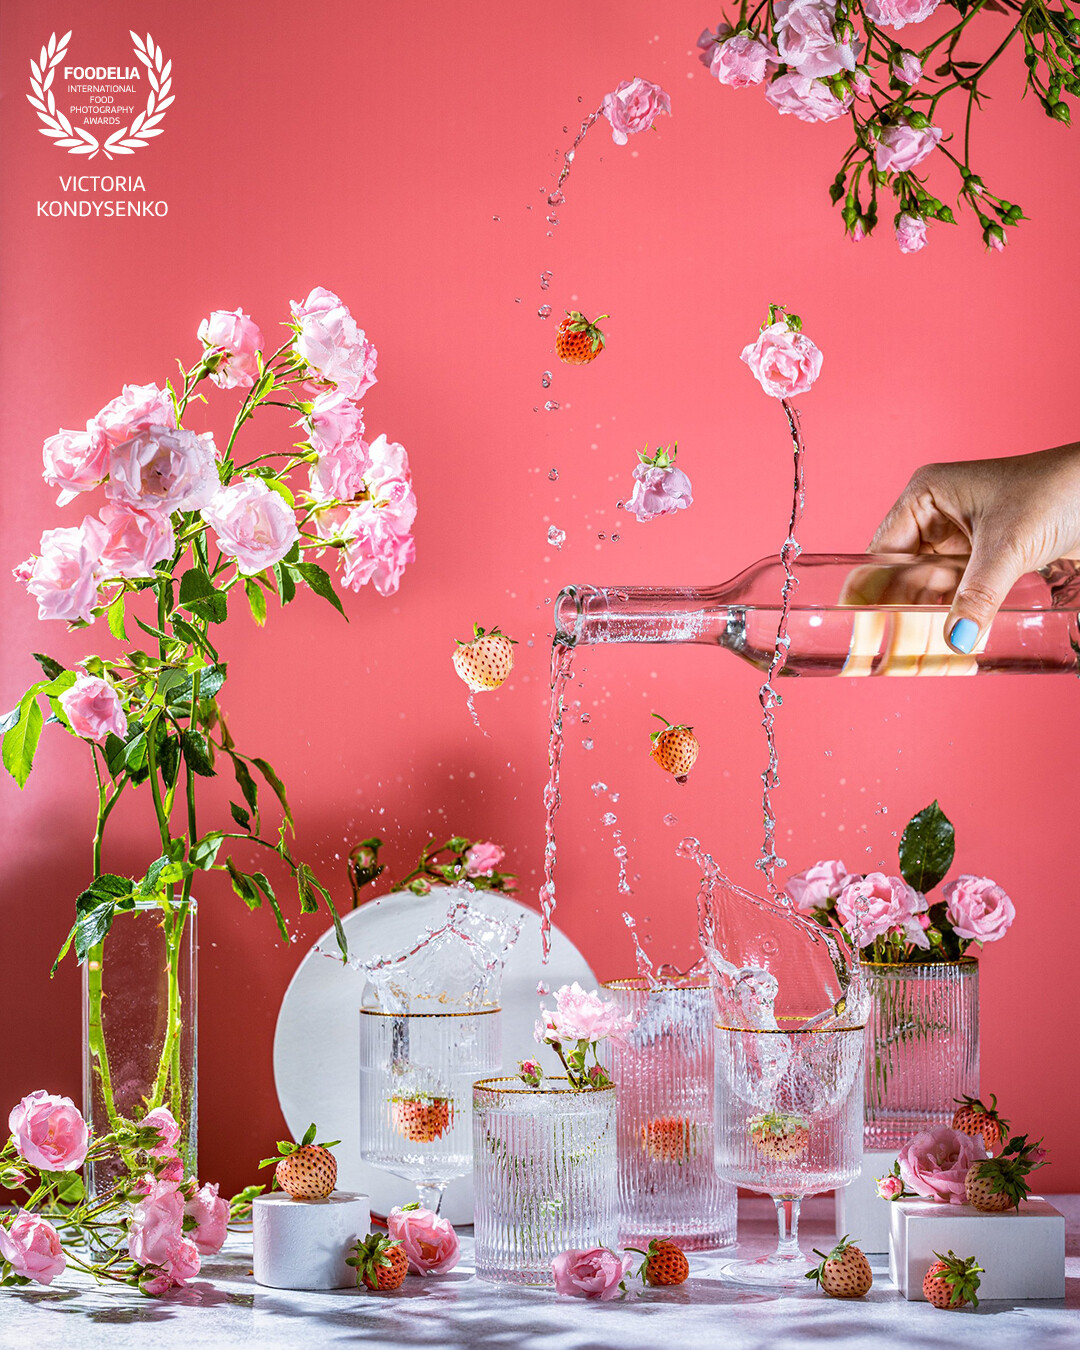 Different elegant glasses with sparkling wine, pink roses and strawberry, women hand is pouring wine